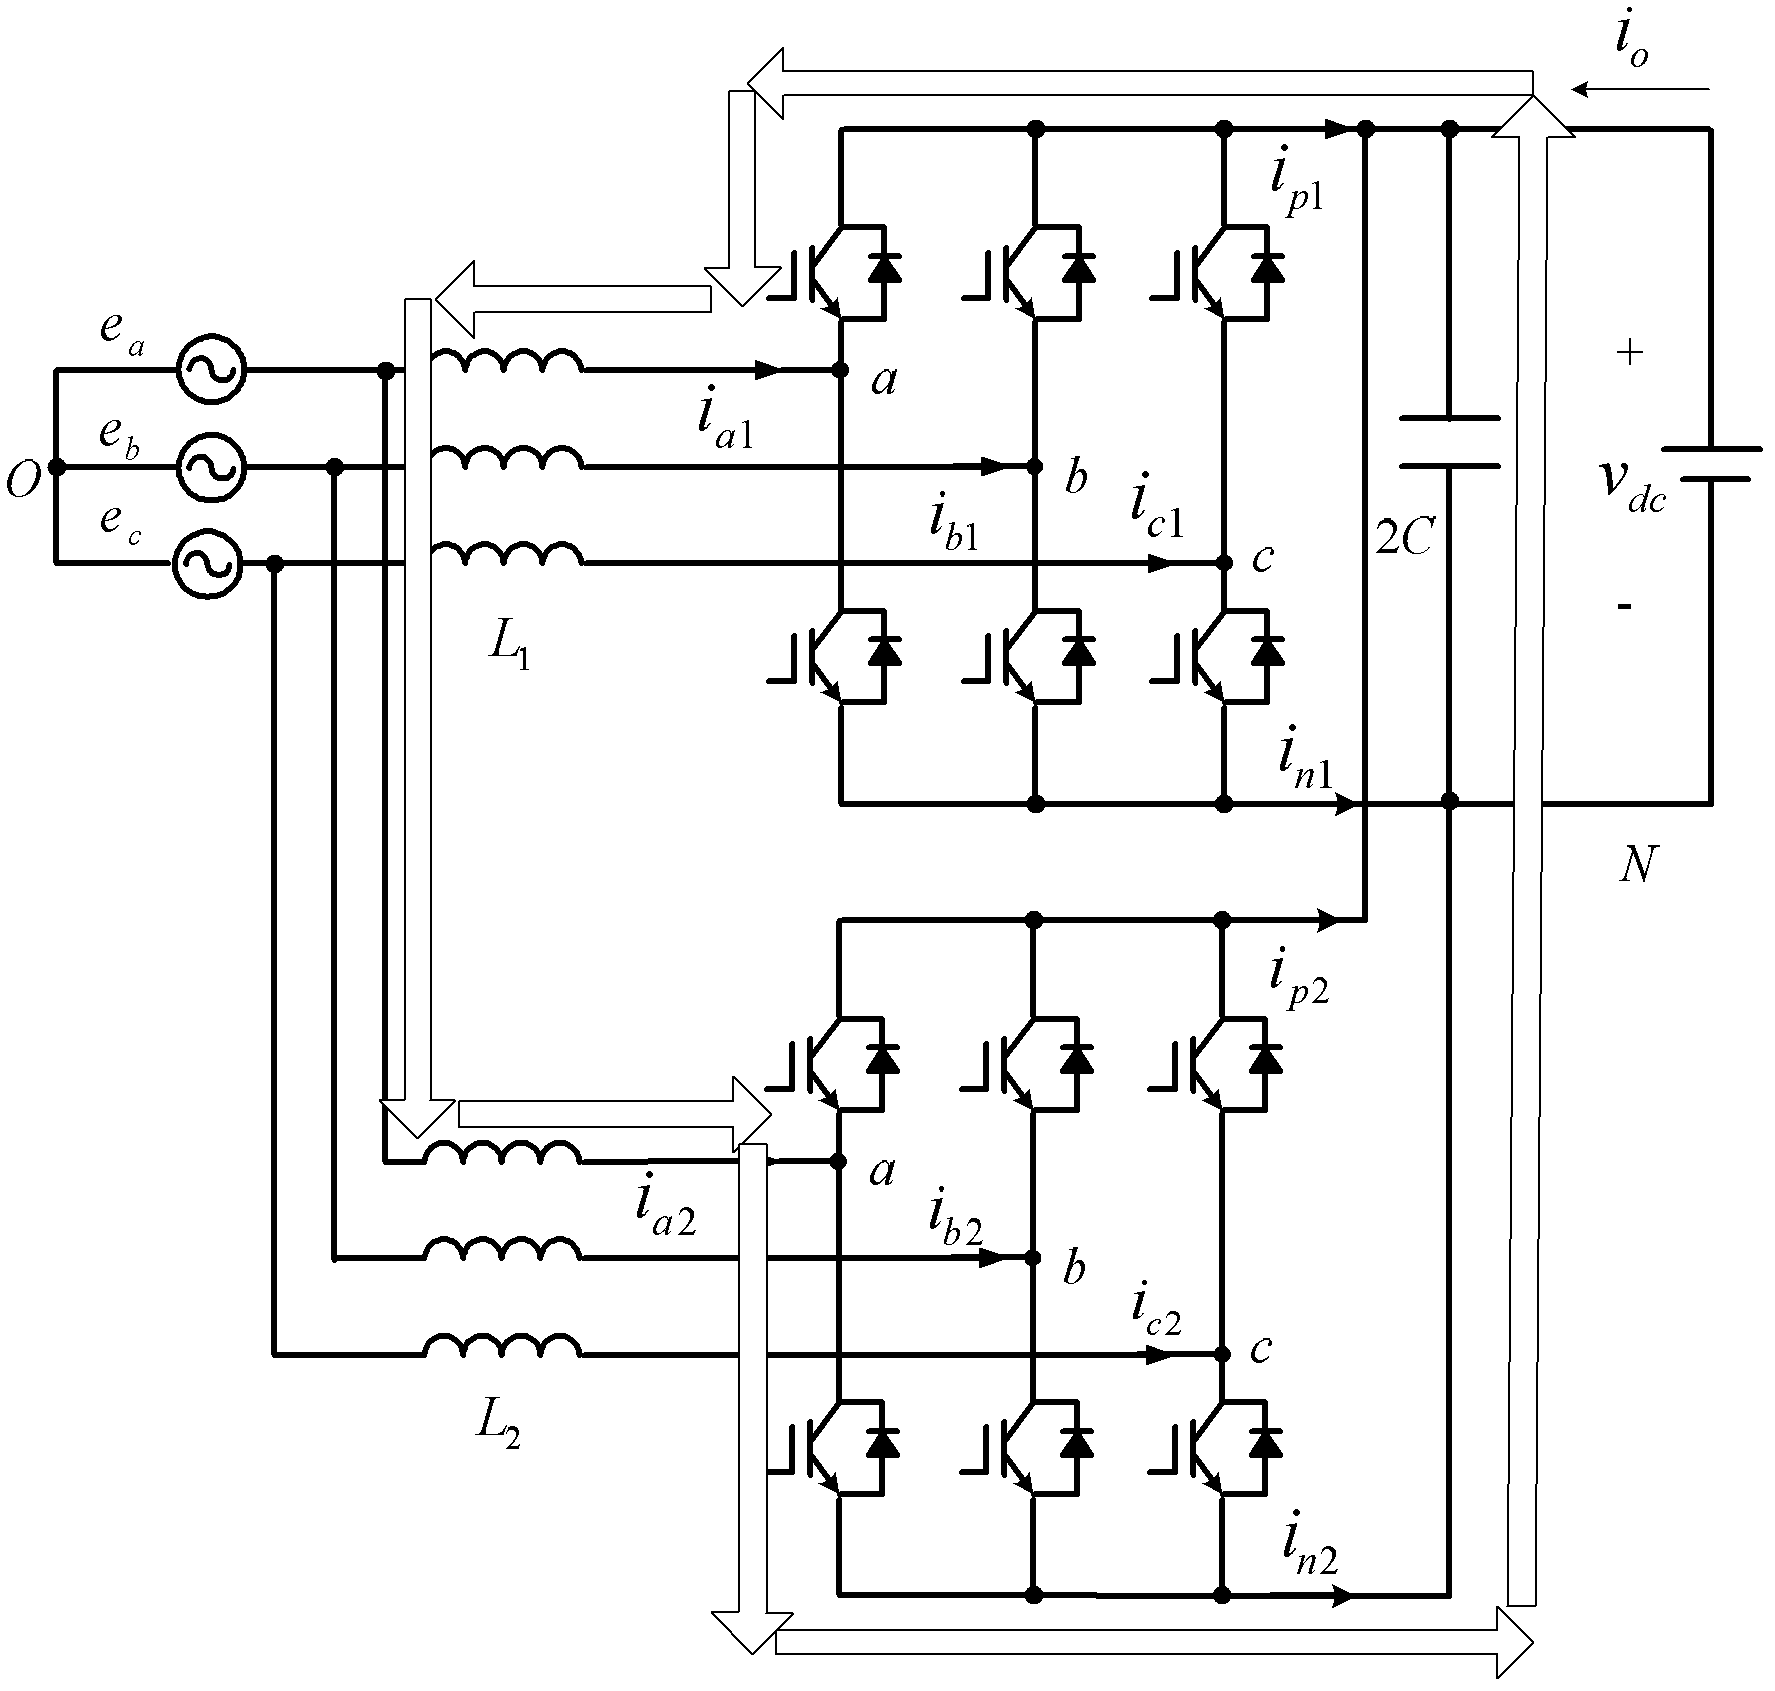 Method for circulating current restraining of parallel system of dual grid-connected inverters based on zero voltage vector feedforward control